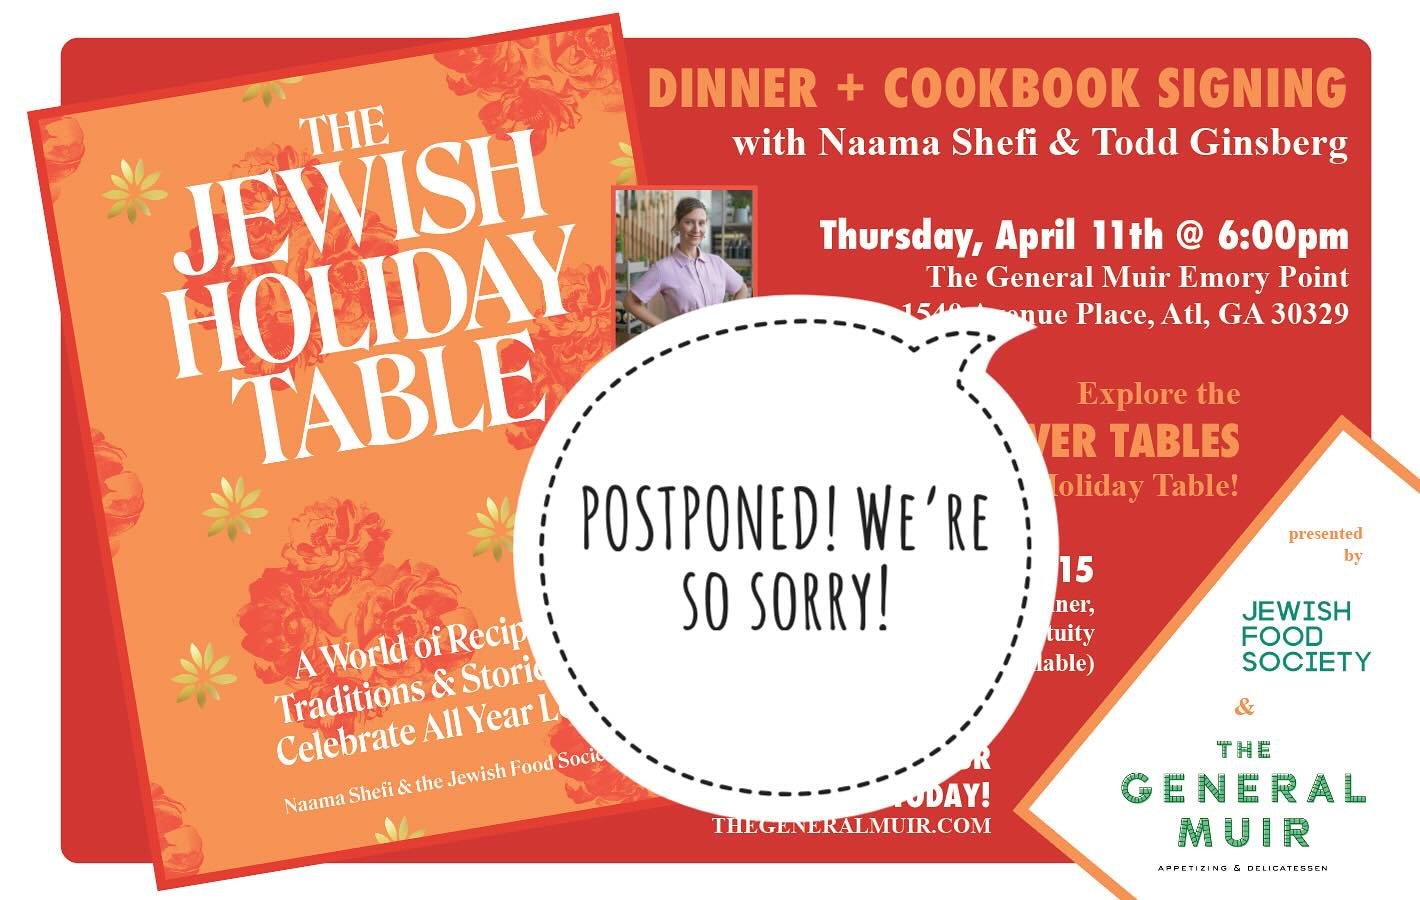 We&rsquo;re so sorry, but the @jewishfoodsociety cookbook tour to @mjcca and dinner at @thegeneralmuir is canceled this week. Hoping to reschedule! We&rsquo;ll be in touch with those of you who bought tickets for dinner.